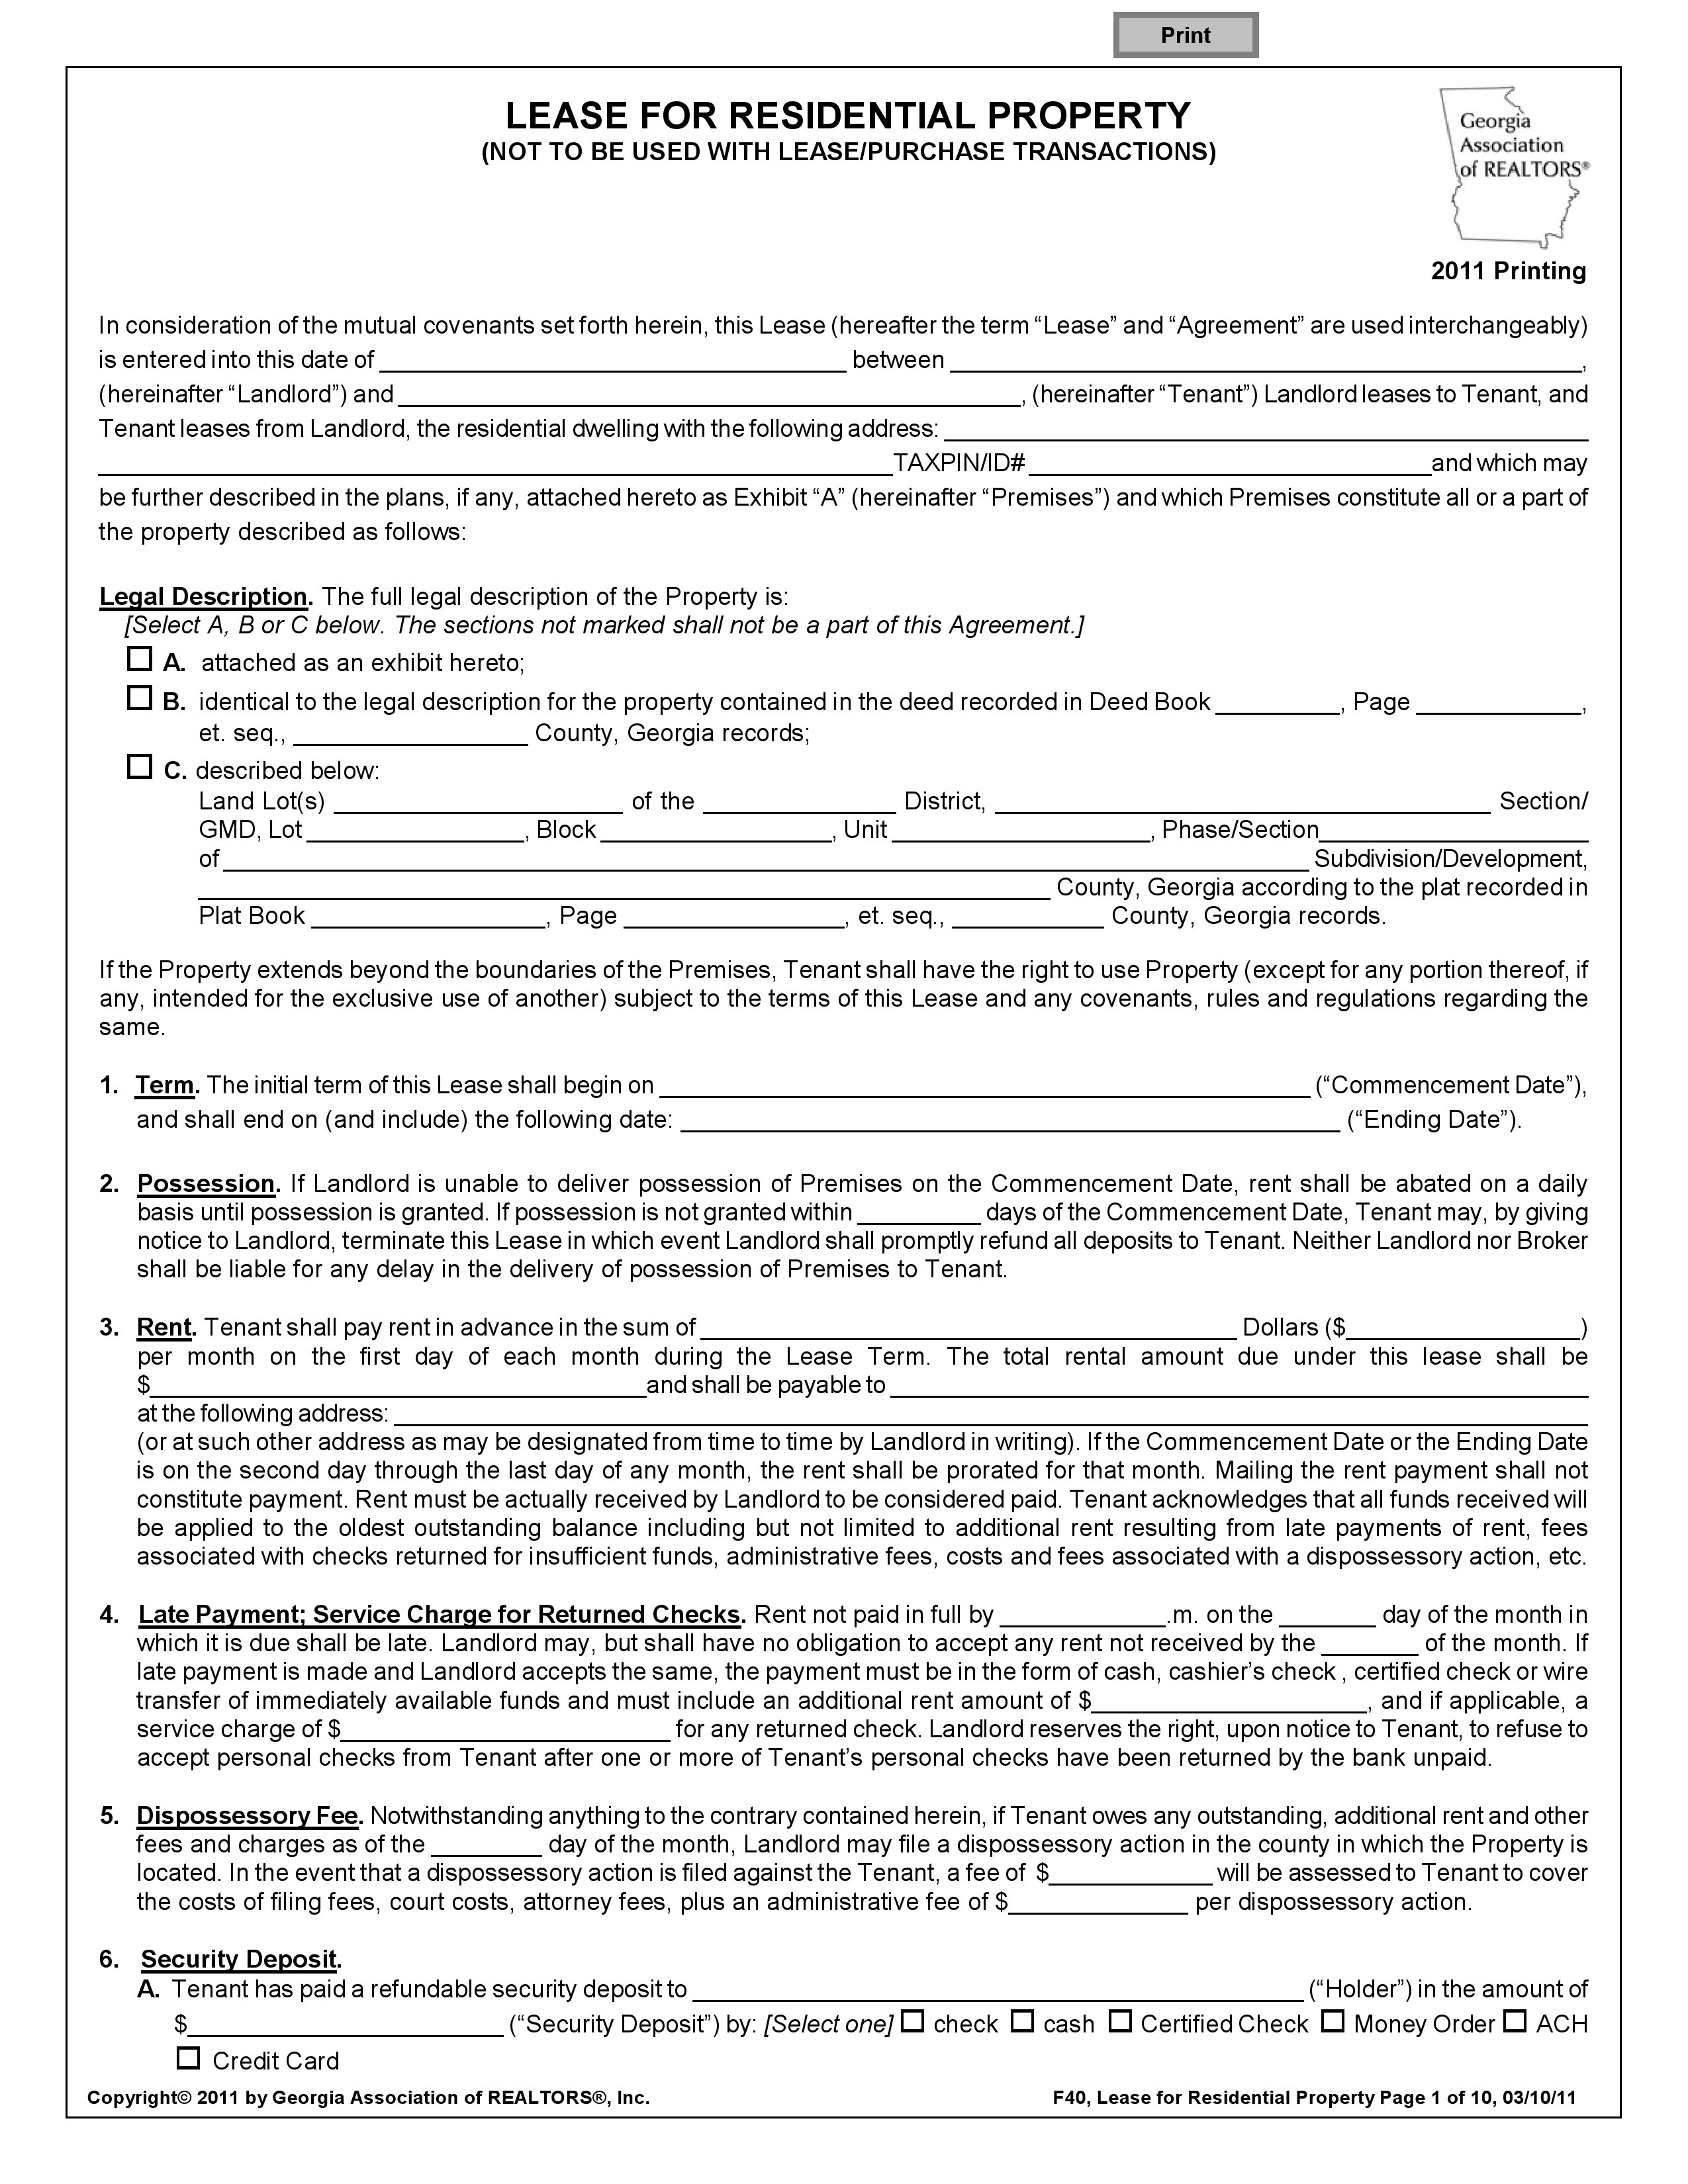 Residential Lease Agreement Template Free Download Blank Rental - Free Printable Lease Agreement Ny